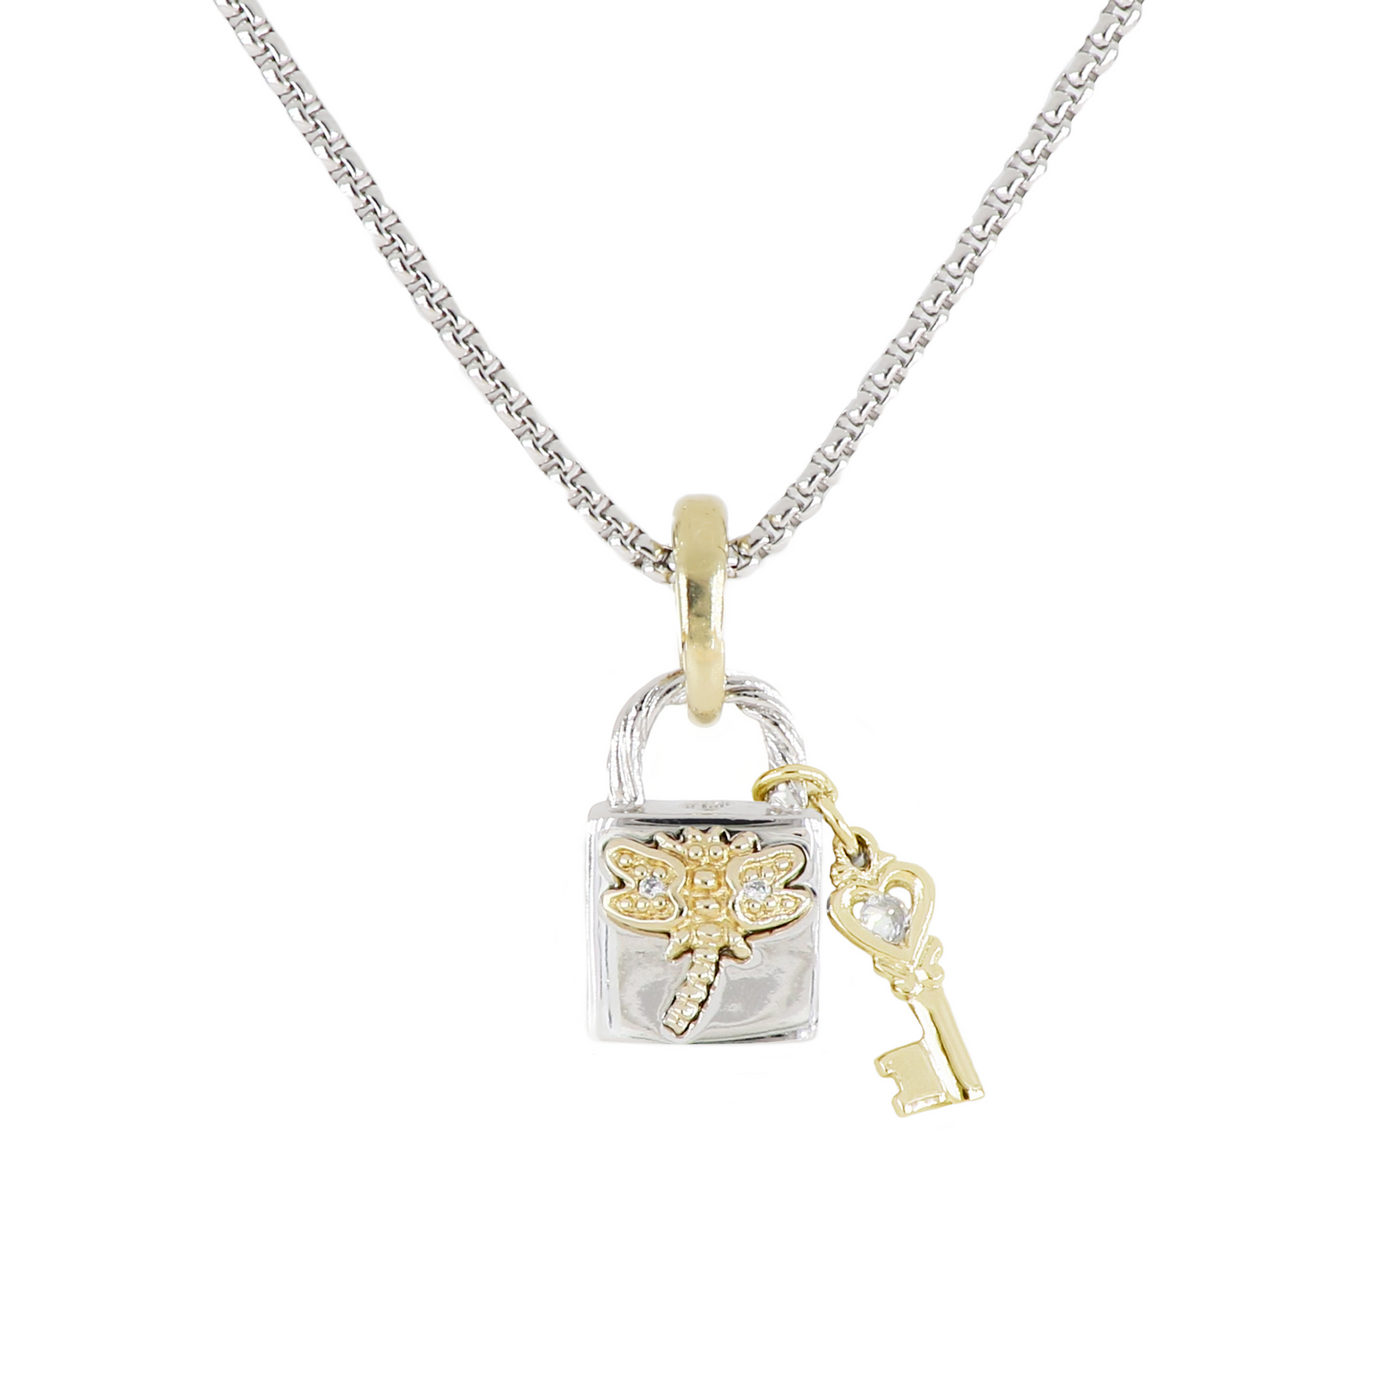 Lock & Key Dragonfly “Pure Spirit” Necklace 16-18" Chain